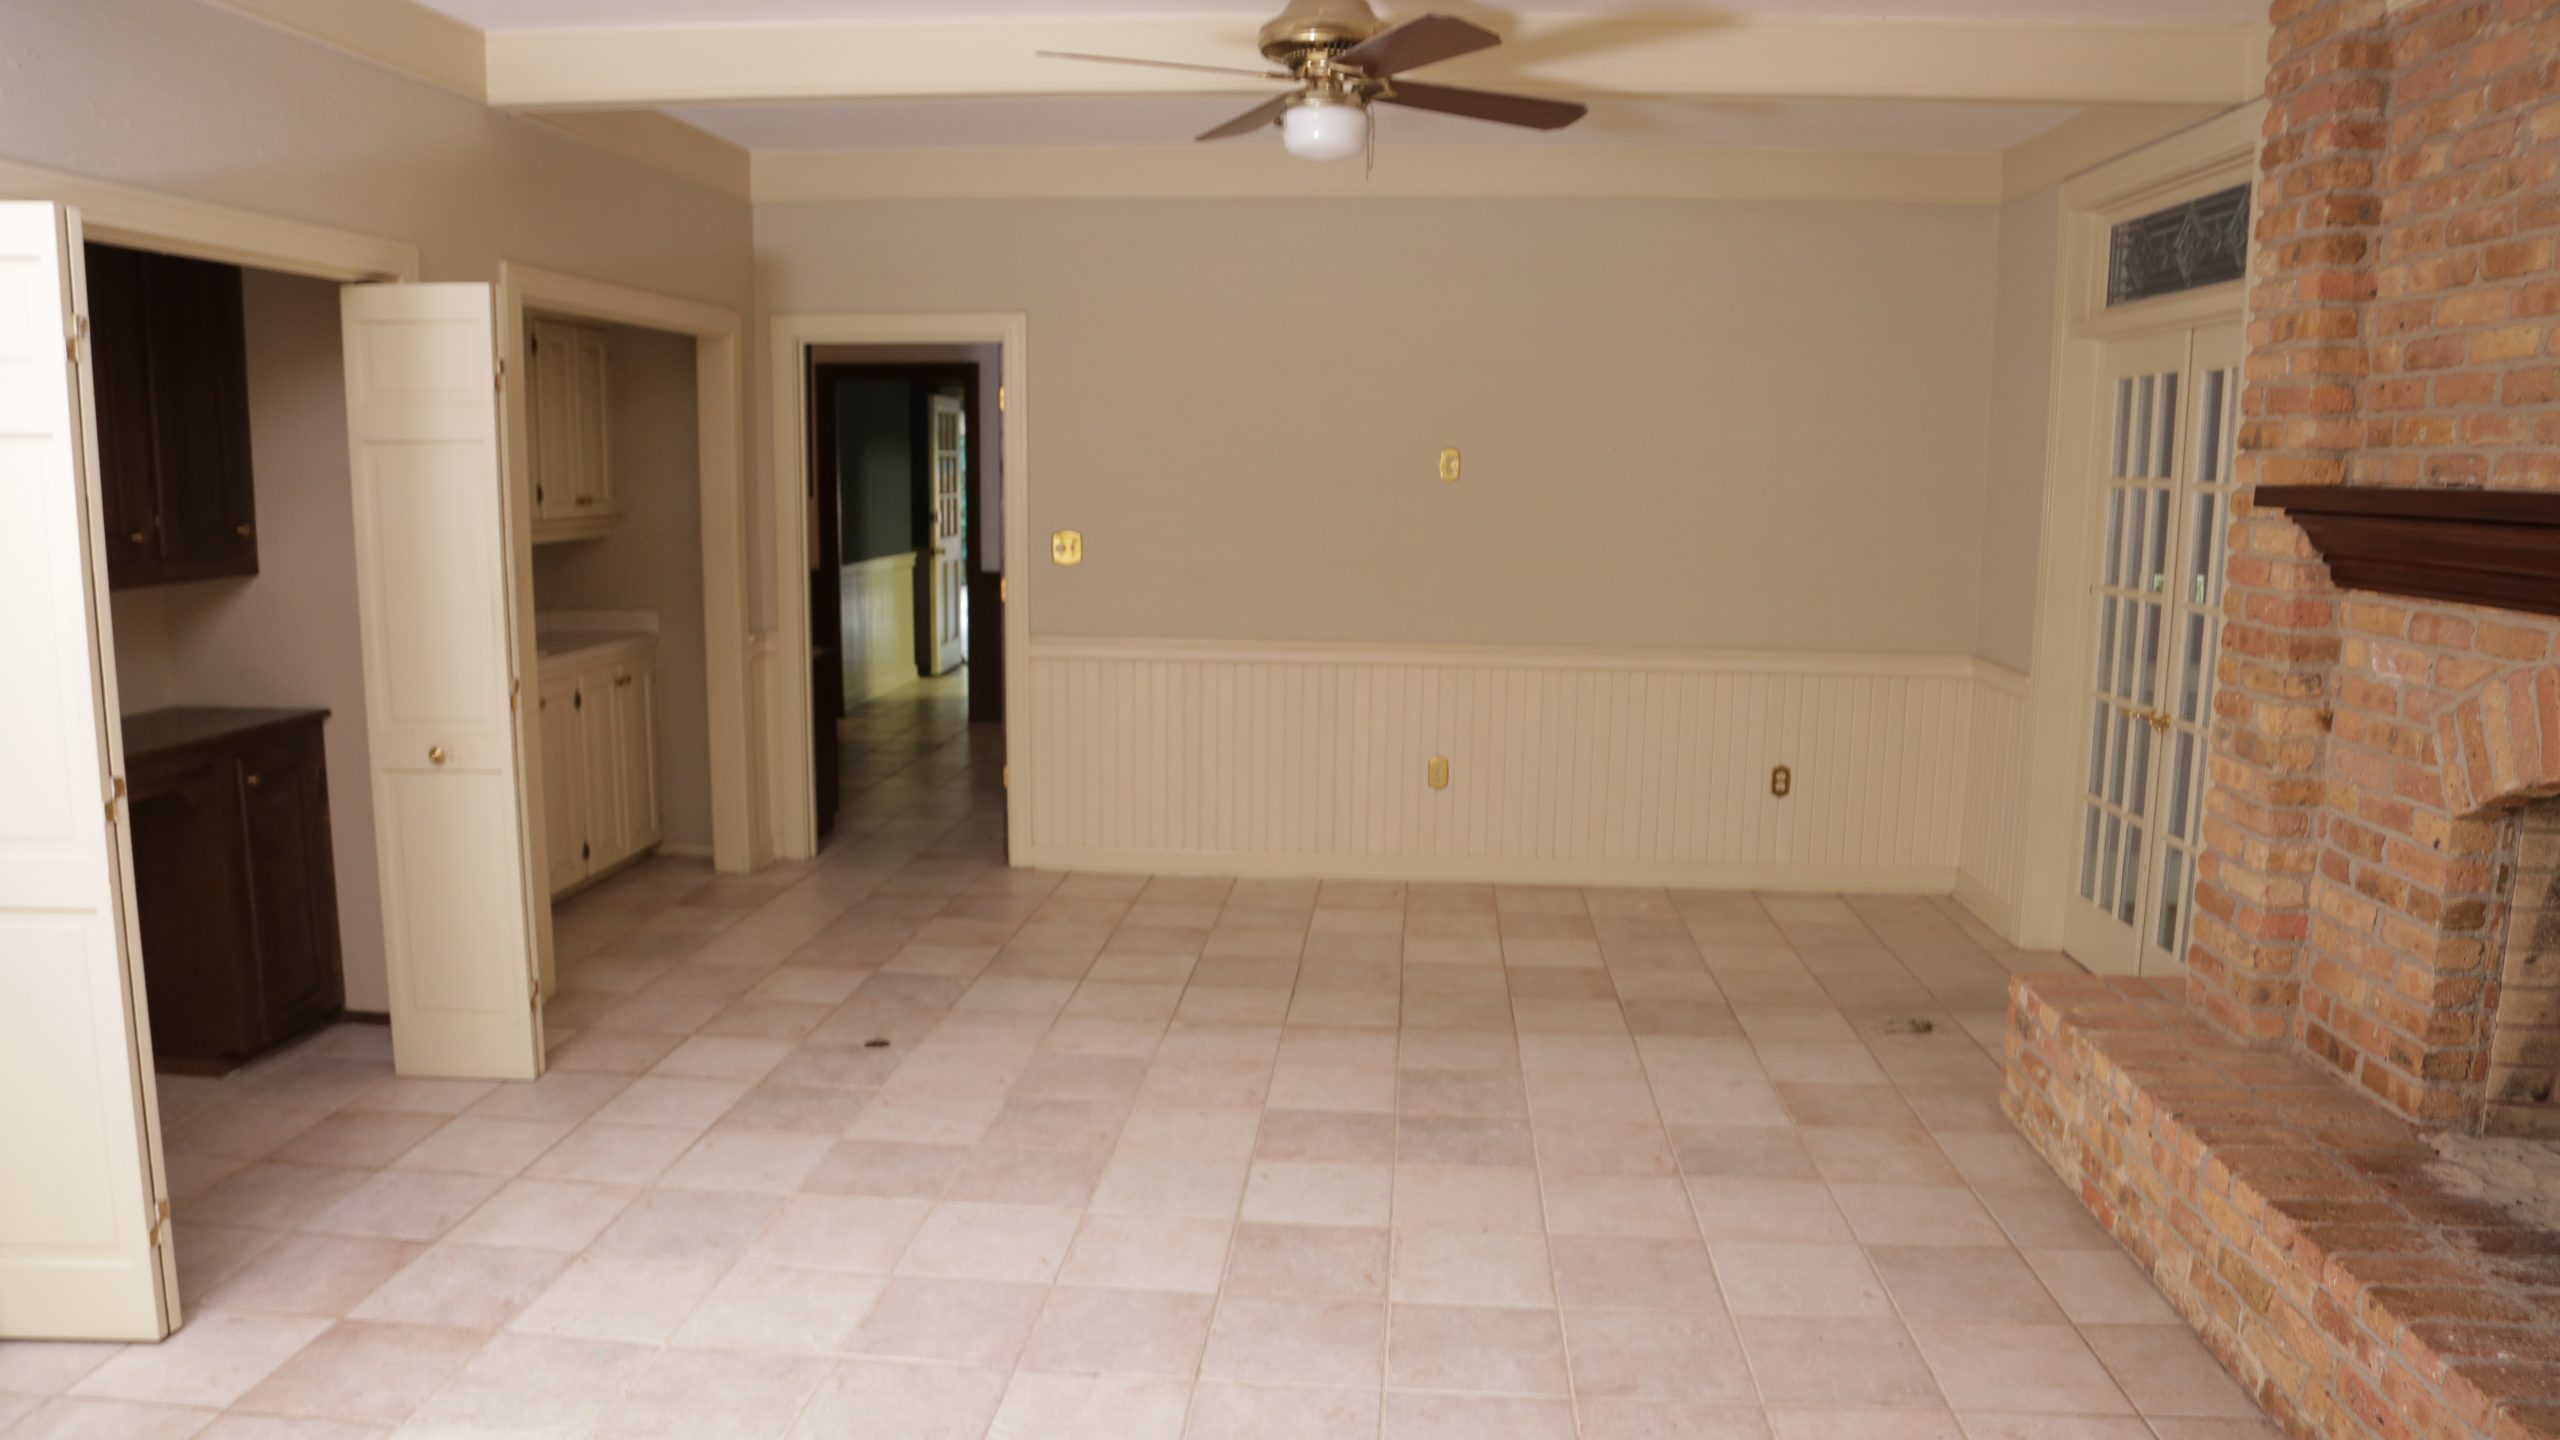 Empty family room with square tile floors and big brick fireplace